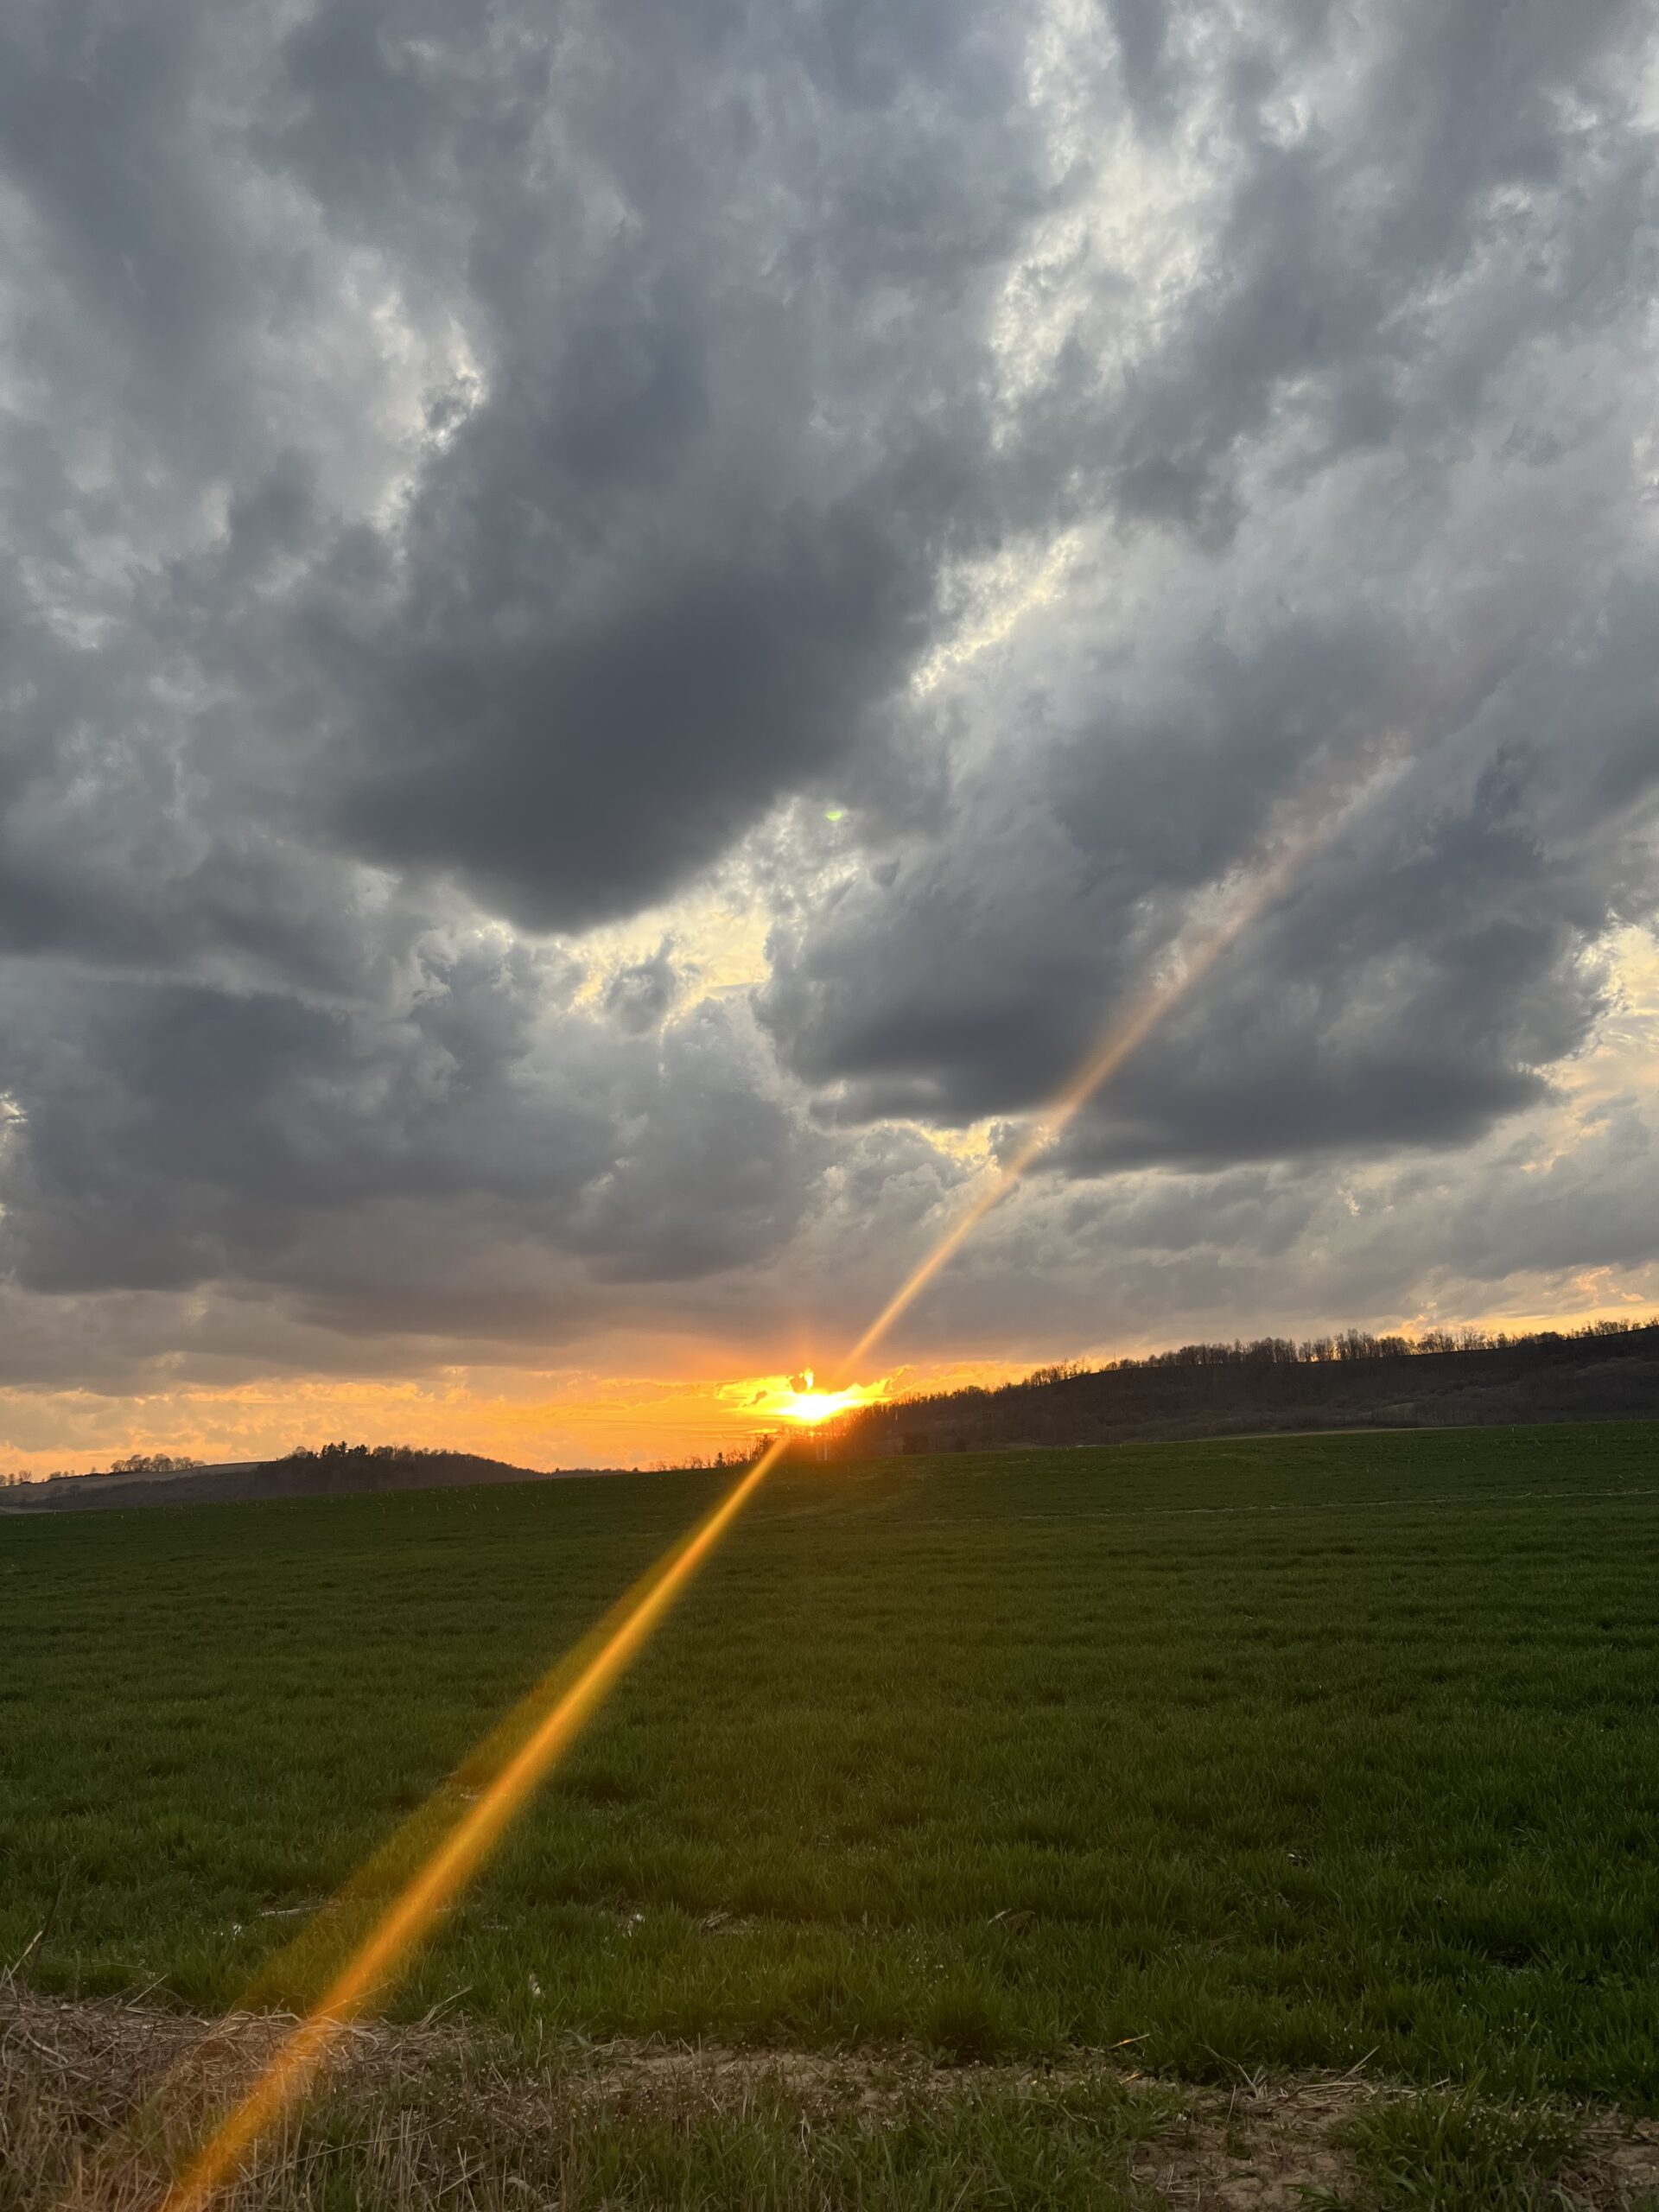 A cloudy sunset taken in western Pennsylvania